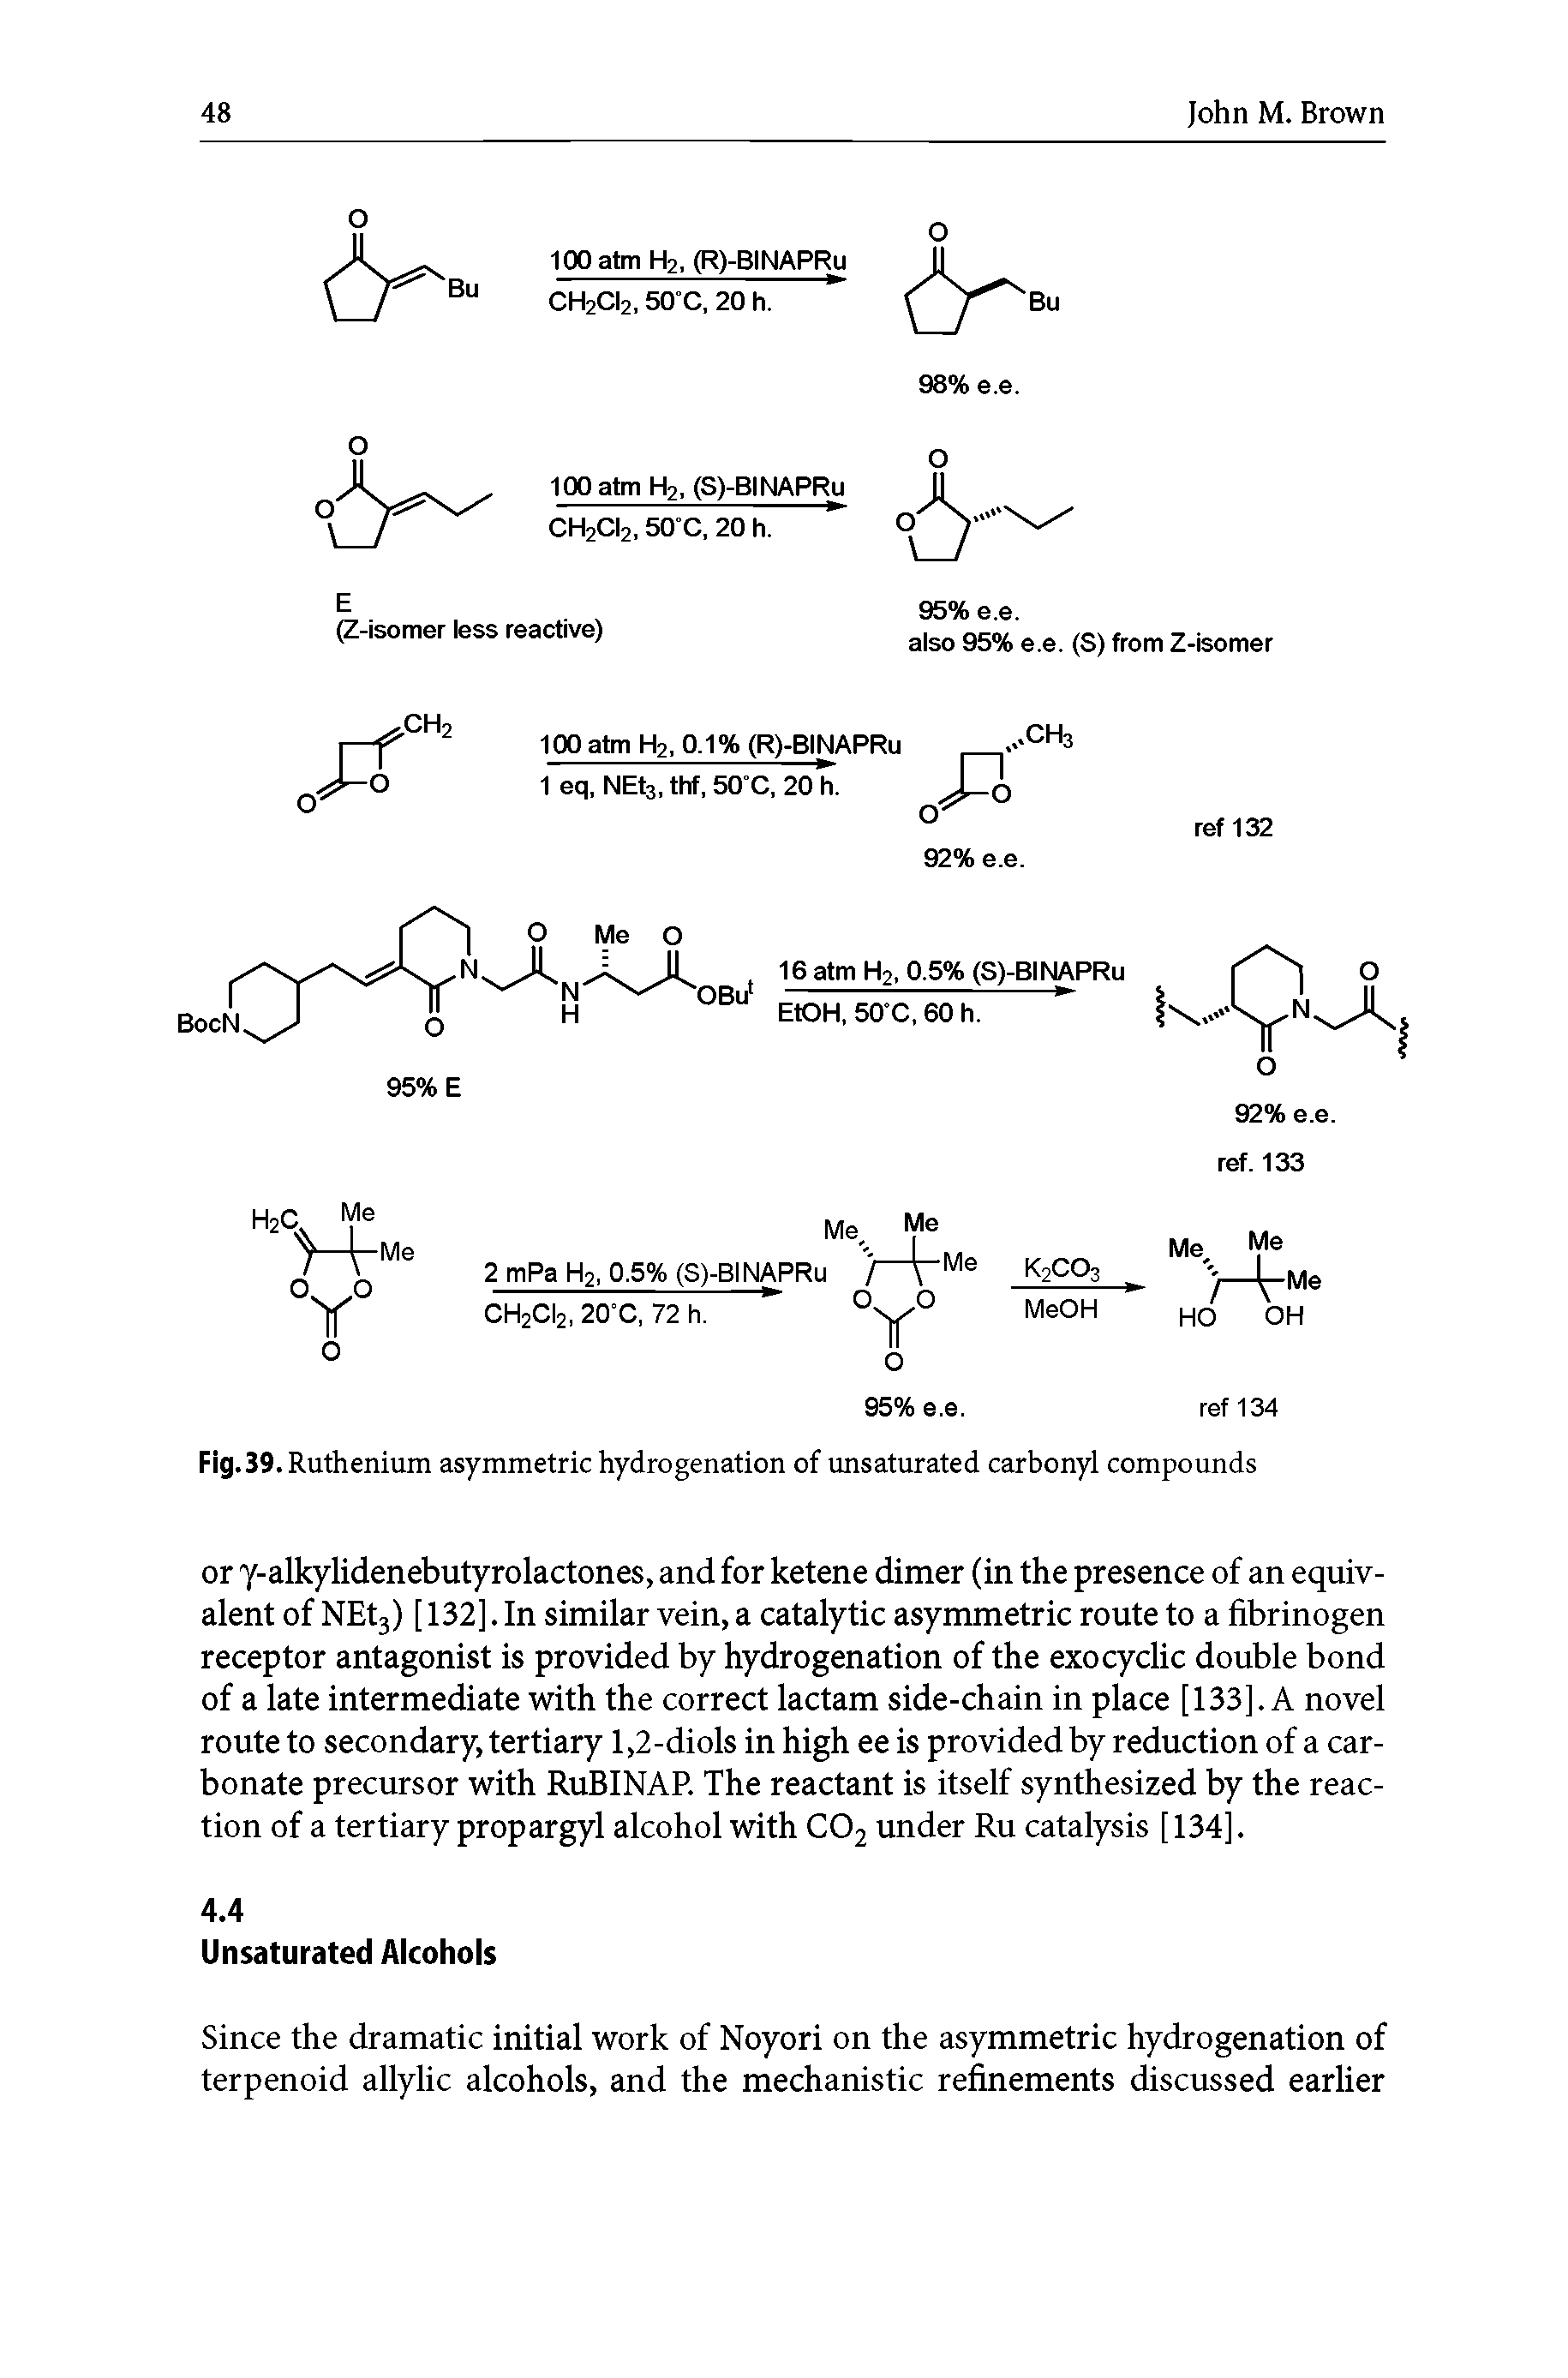 Fig.39. Ruthenium asymmetric hydrogenation of unsaturated carbonyl compounds...